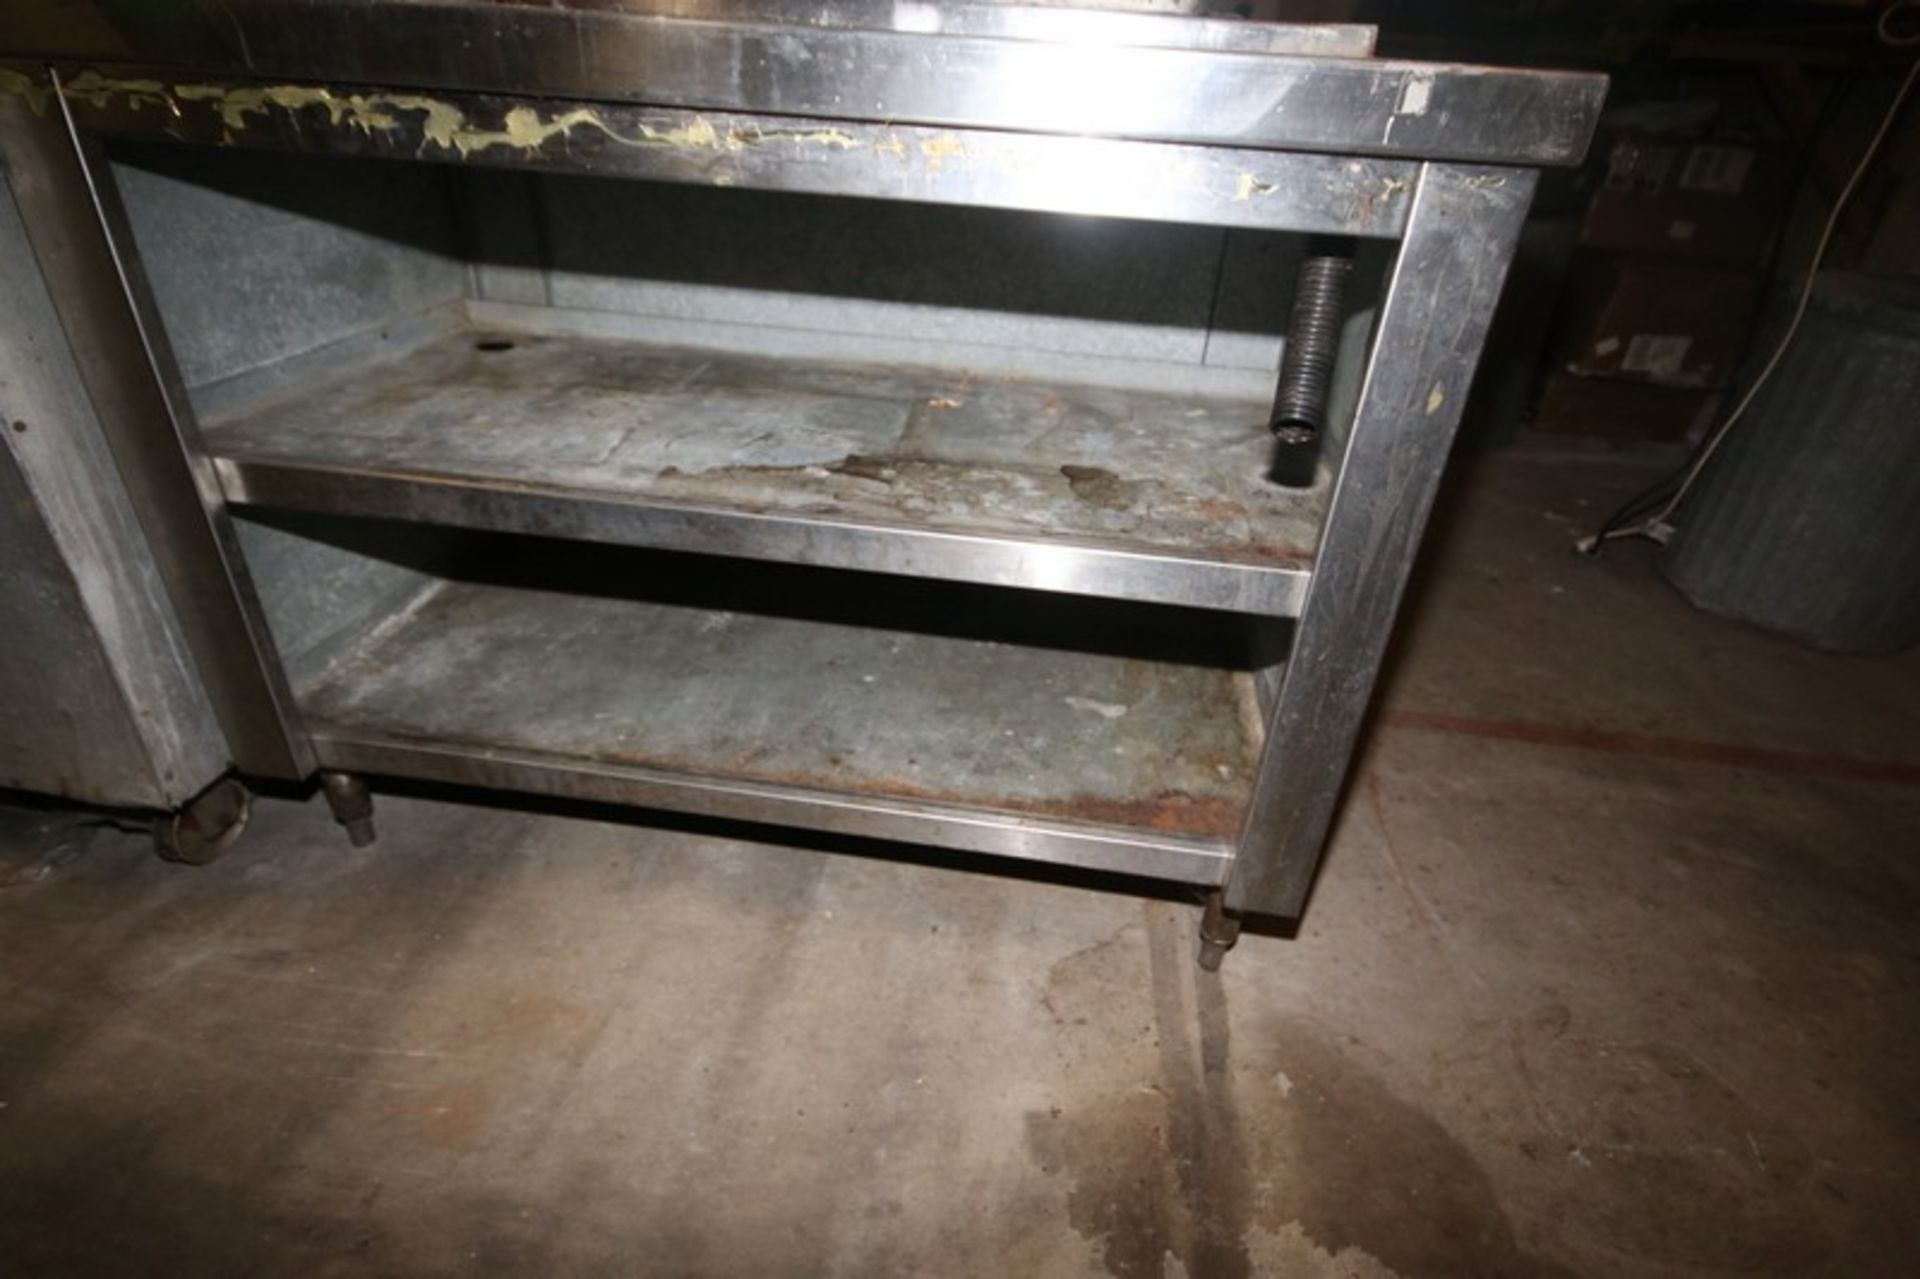 S/S Counter with Top Drain, Overall Dims.: Aprox. 48" L x 30" W x 35" H, with Bottom Shelves ( - Image 2 of 3